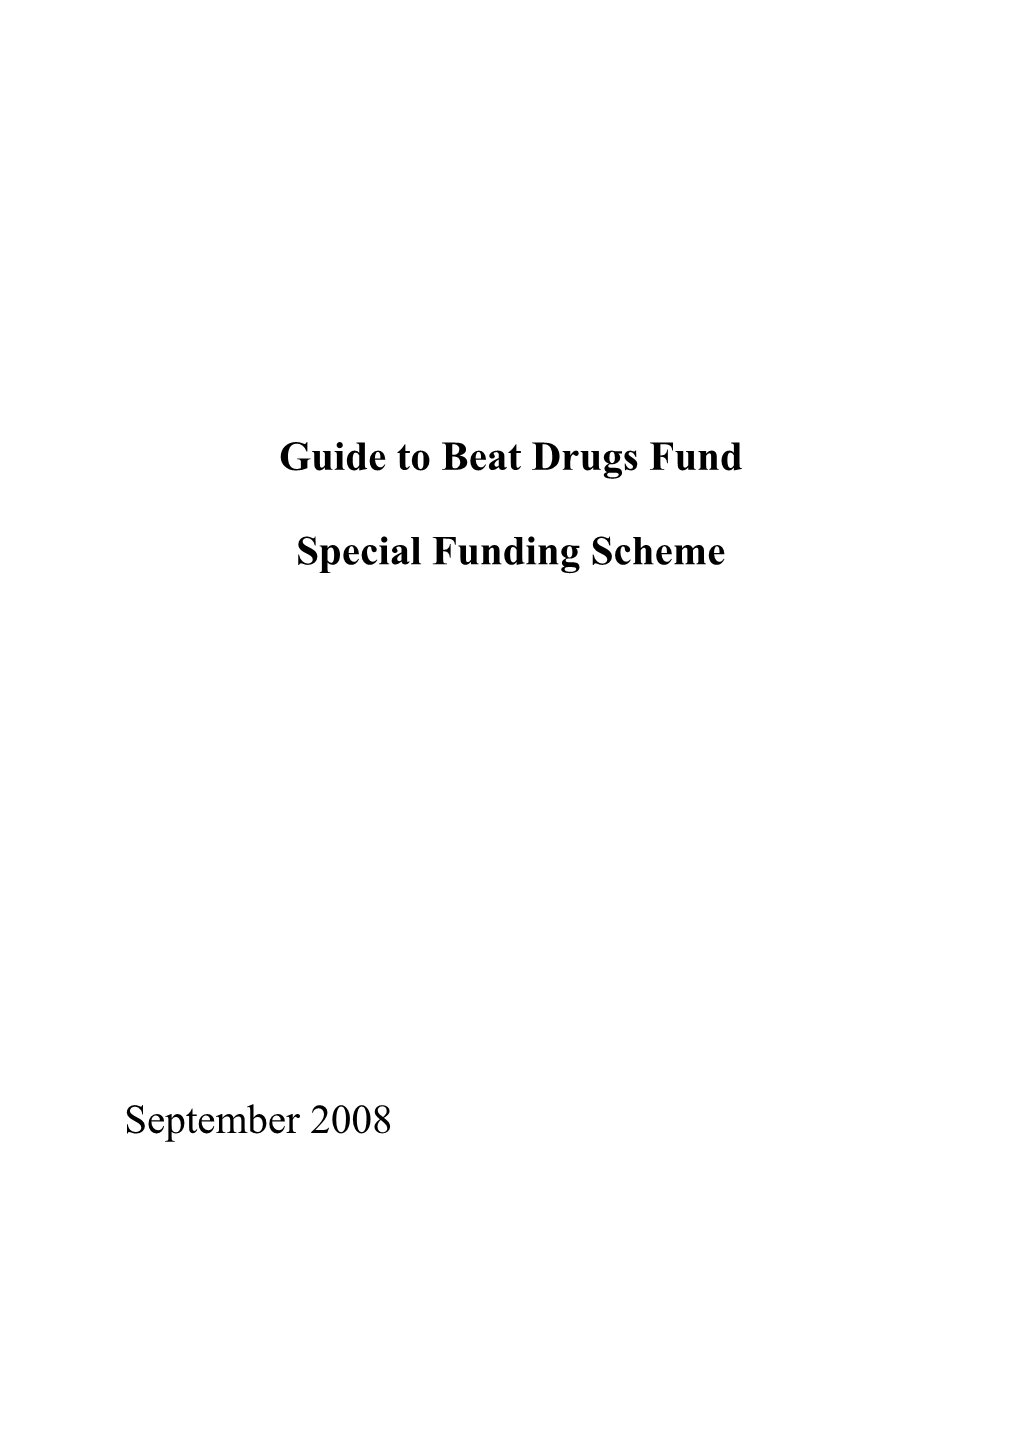 Application for the Beat Drugs Fund